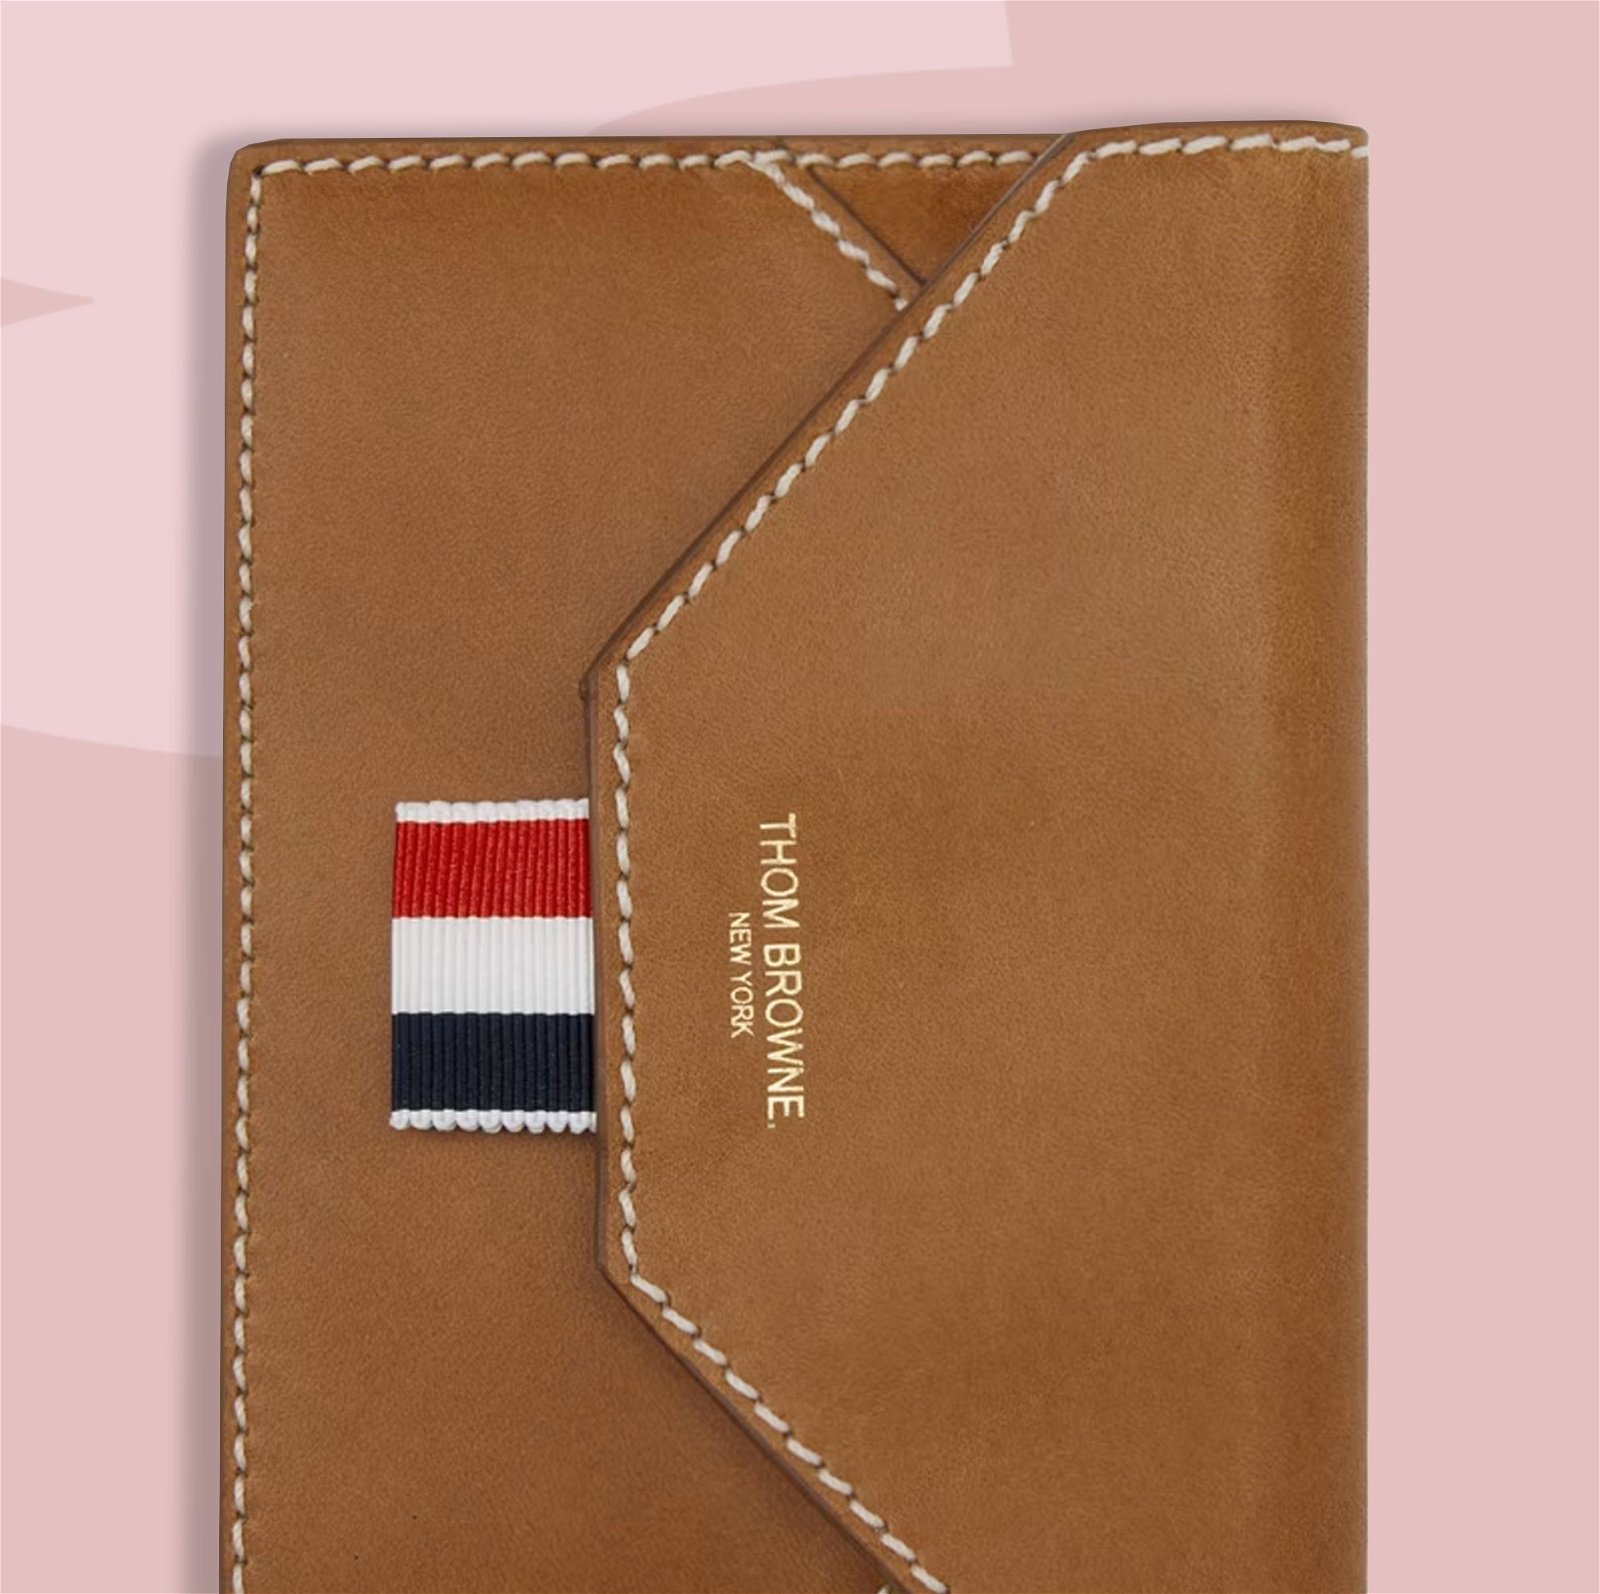 20 Wallets That Sit Comfortably in Your Front Pocket